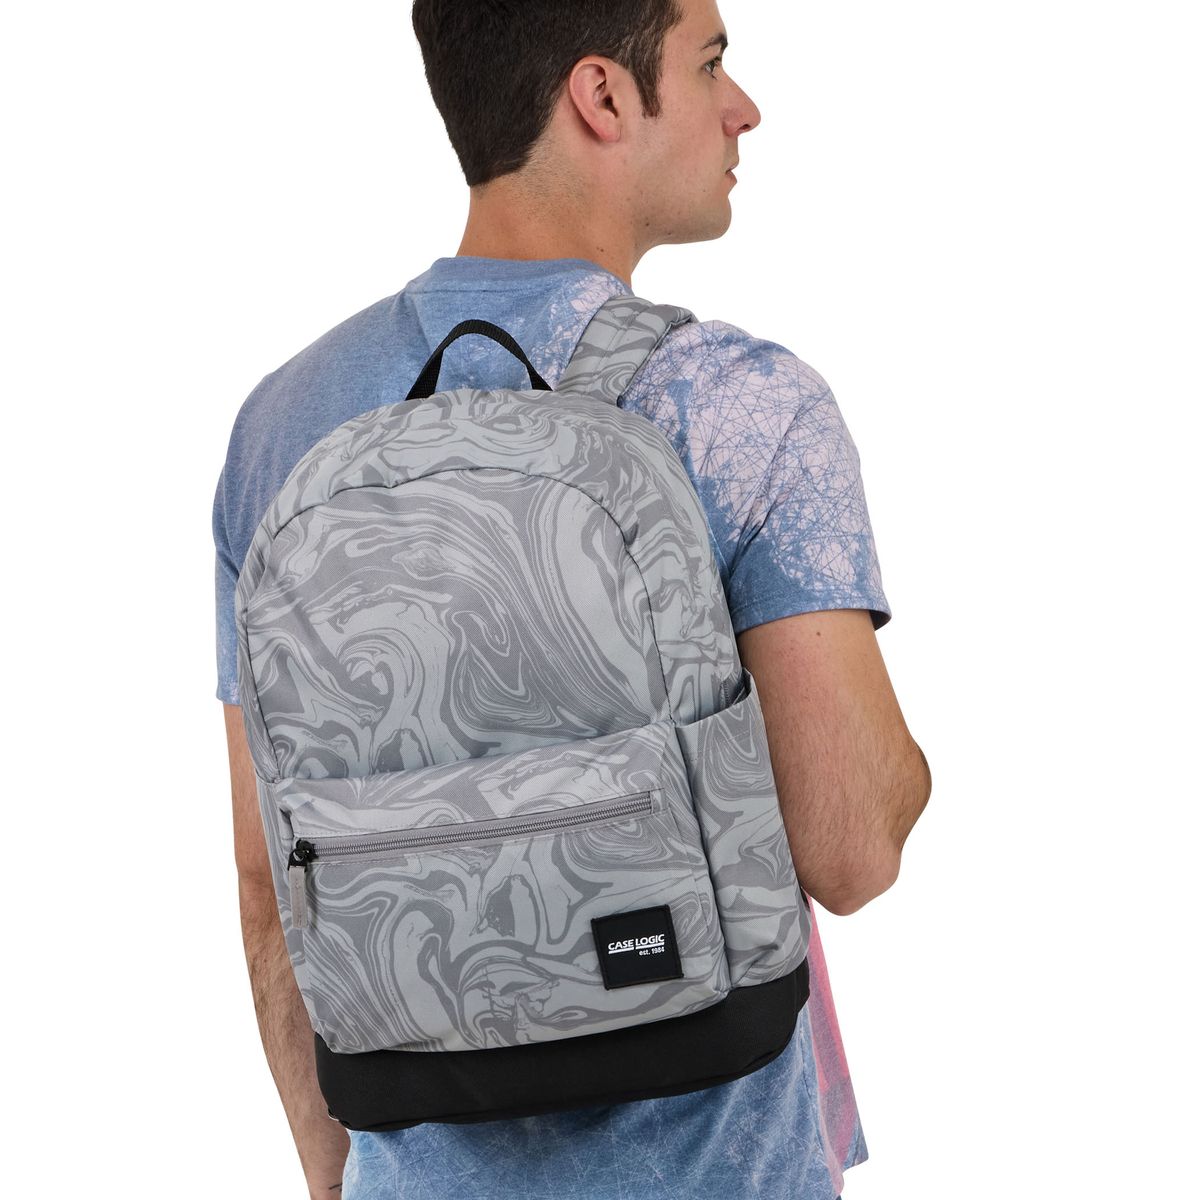 Case Logic Commence Recycled Backpack recycled backpack